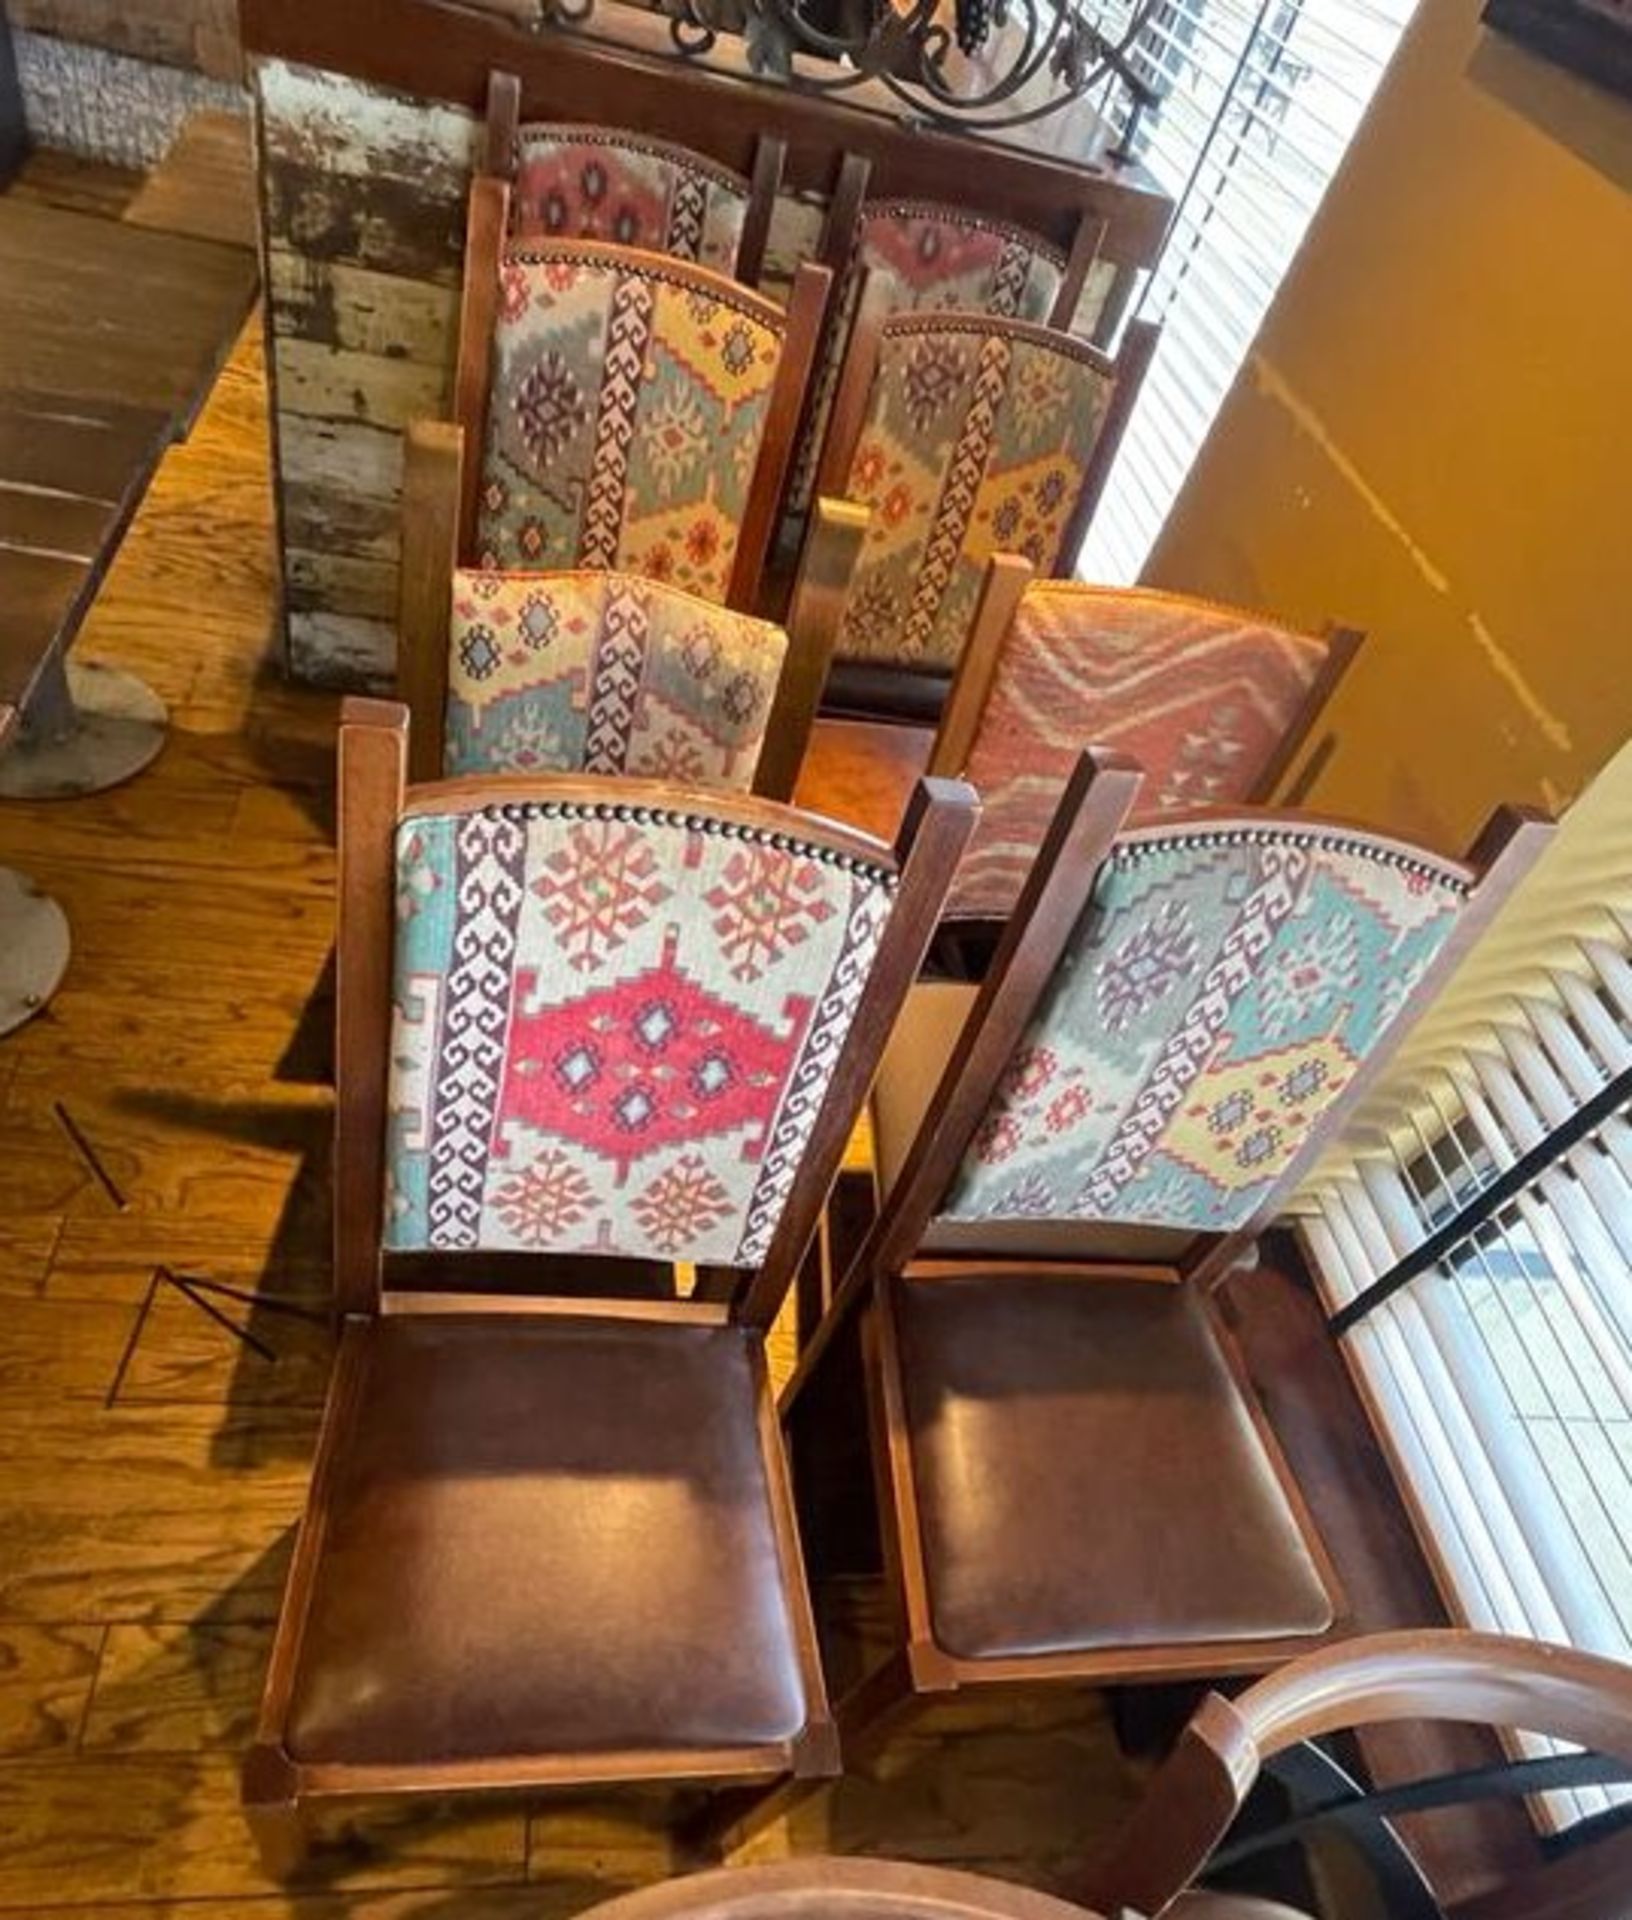 15 x High Back Dining Chairs From a Mexican Themed Restaurant - Features Wooden Frames, Brown Seat - Image 6 of 9